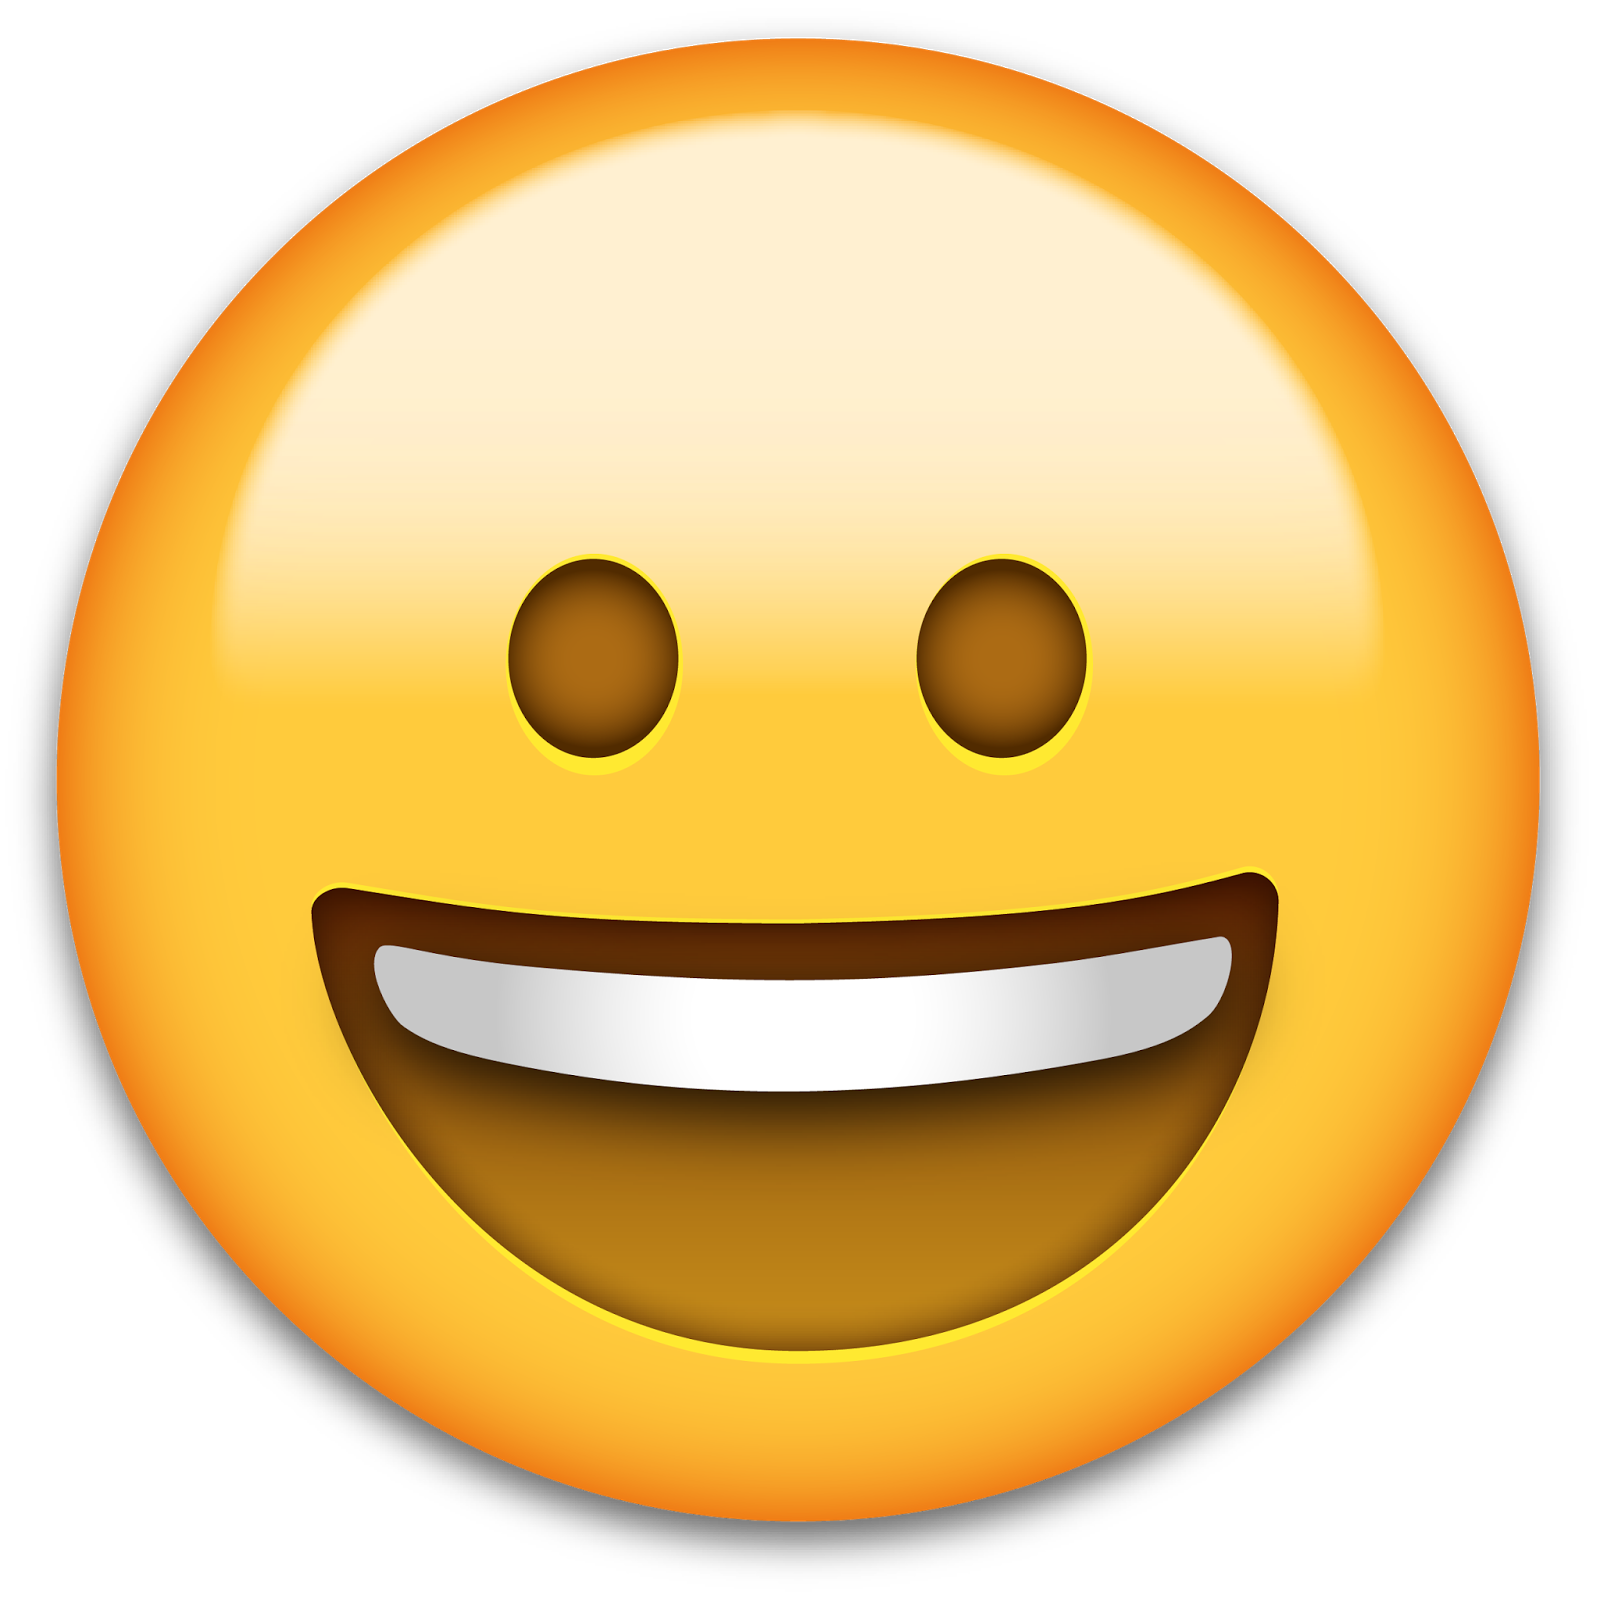 Emoticon Text Smiley Messaging Emoji PNG Image High Quality Clipart